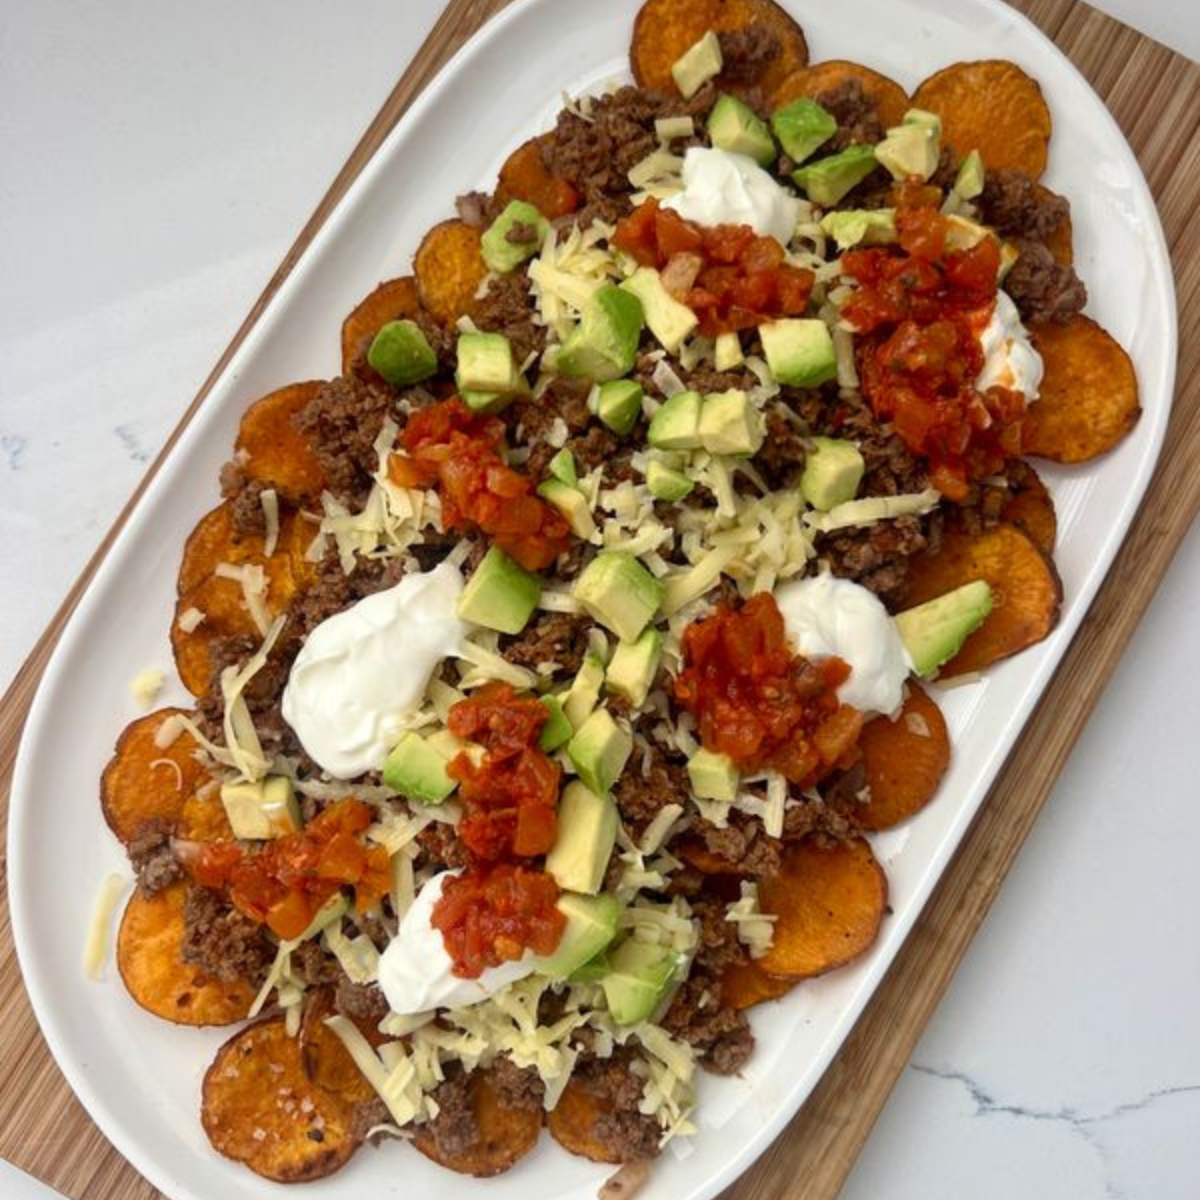 {"Text":"","URL":"https://www.chirnsidepark.com.au/the-chirnside-park-collective/the-food-diary/2024/healthy-sweet-potato-nachos","OpenNewWindow":false}